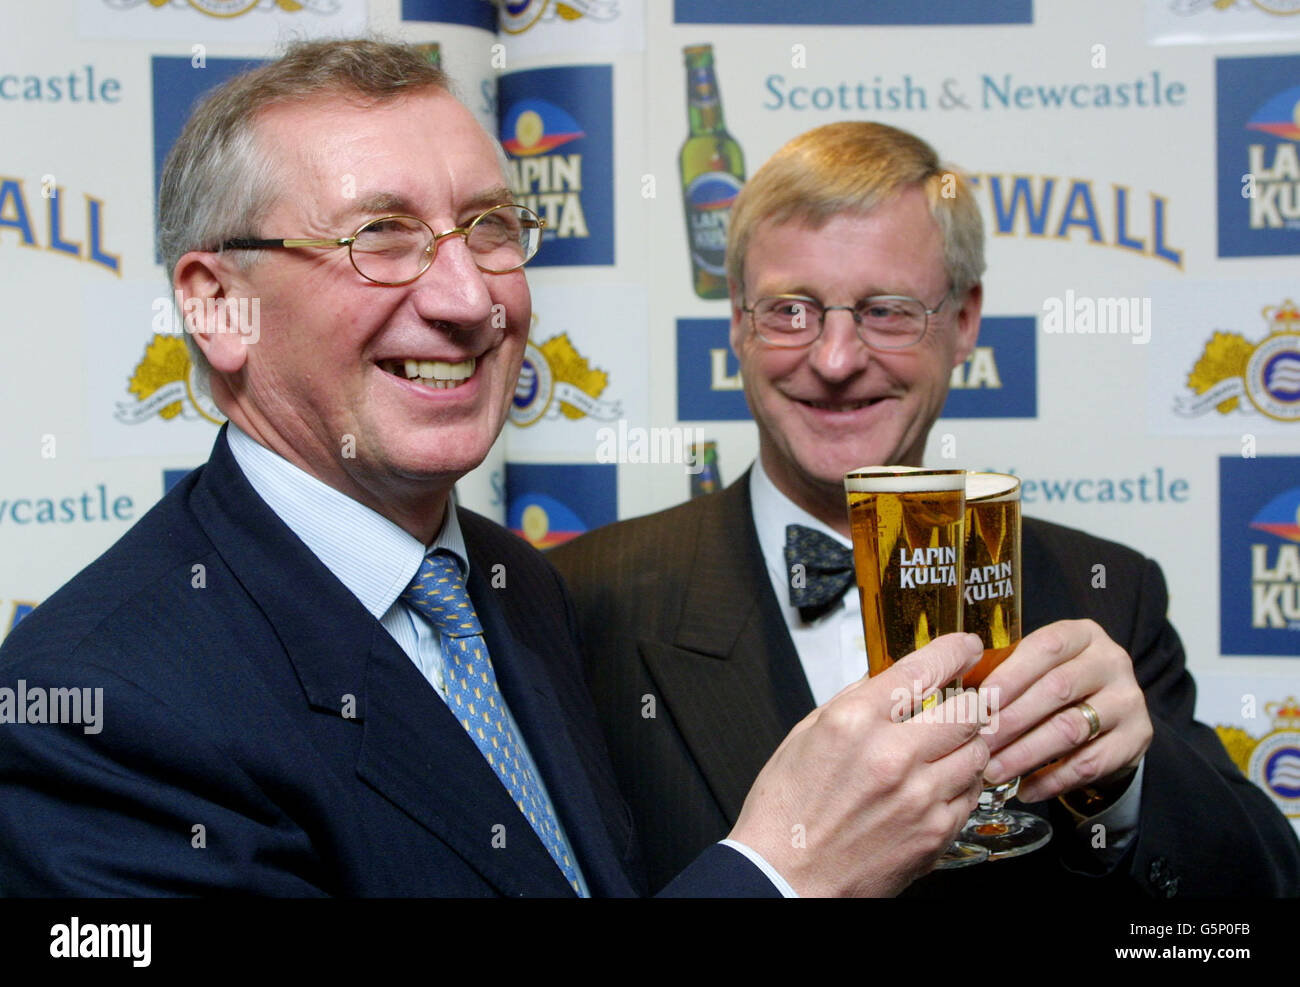 Brian Stewart, (left) Chairman of Scottish & Newcastle brewers and Henrik Therman, Director of Hartwall and Chairman of BBH, make a toast with Lapin Kulta beer, London. Scottish & Newcastle PLC signed an agreement to acquire the Finnish drinks company Hartwell. * The 1.2 billion deal is part of Edinburgh-based S&N's ongoing strategy to become an international presence. Stock Photo